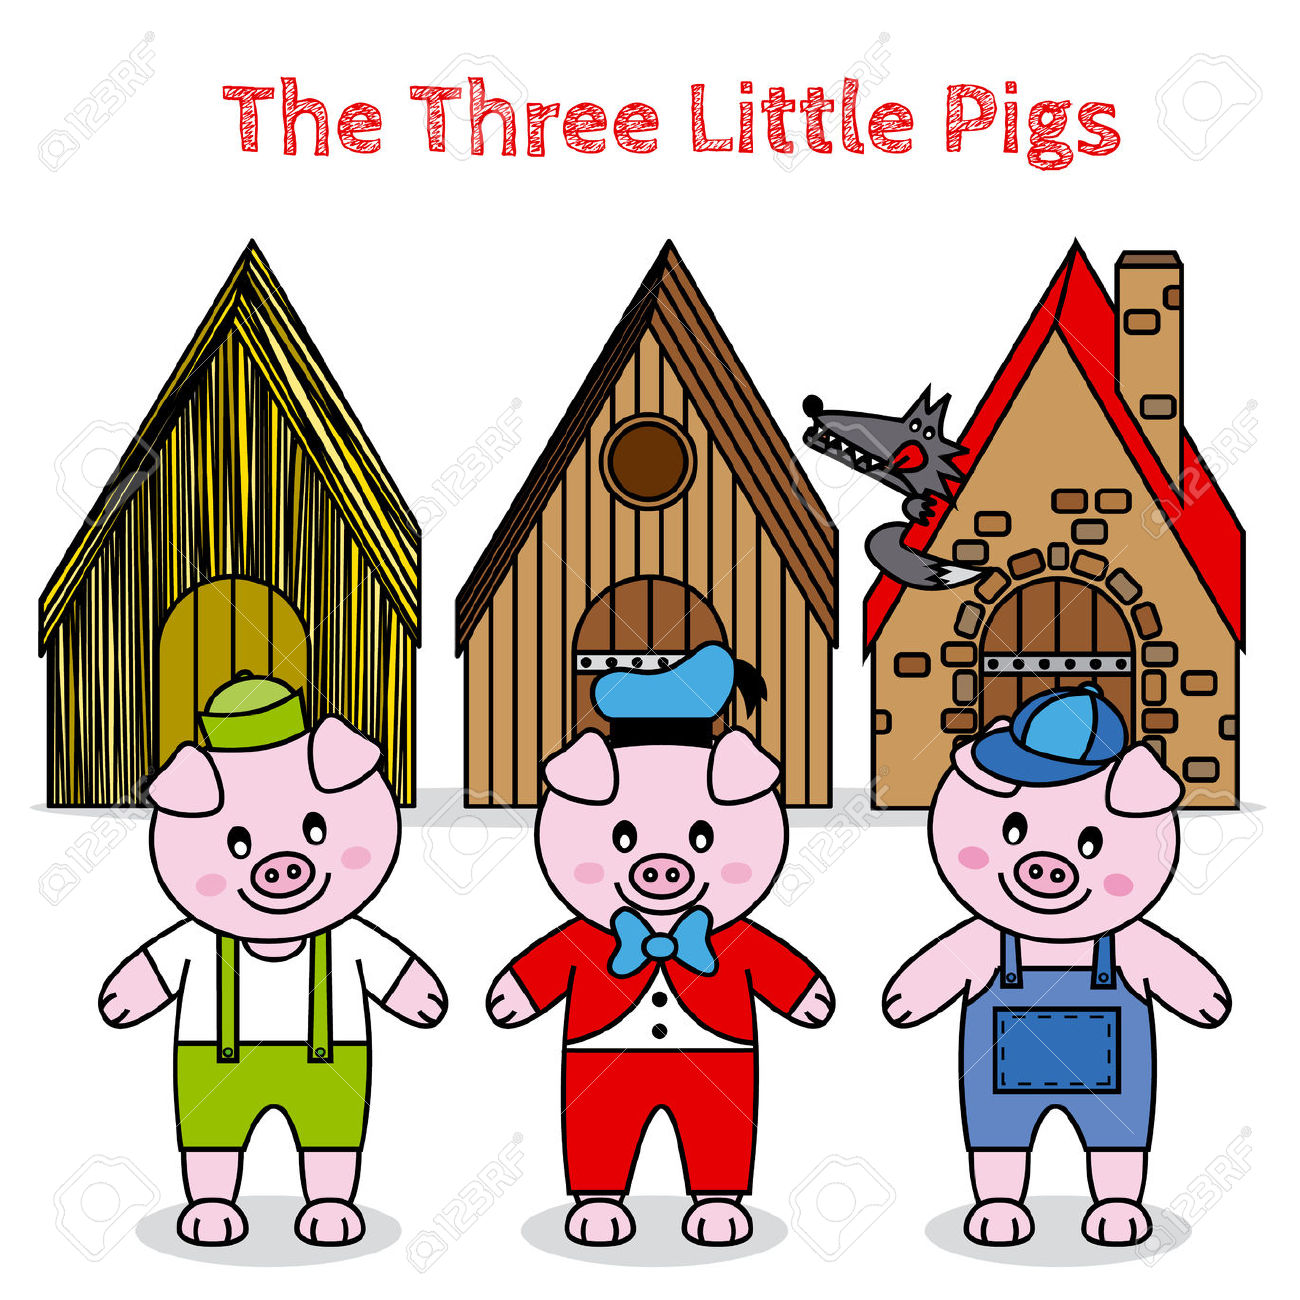 For The Three Little Pigs So 